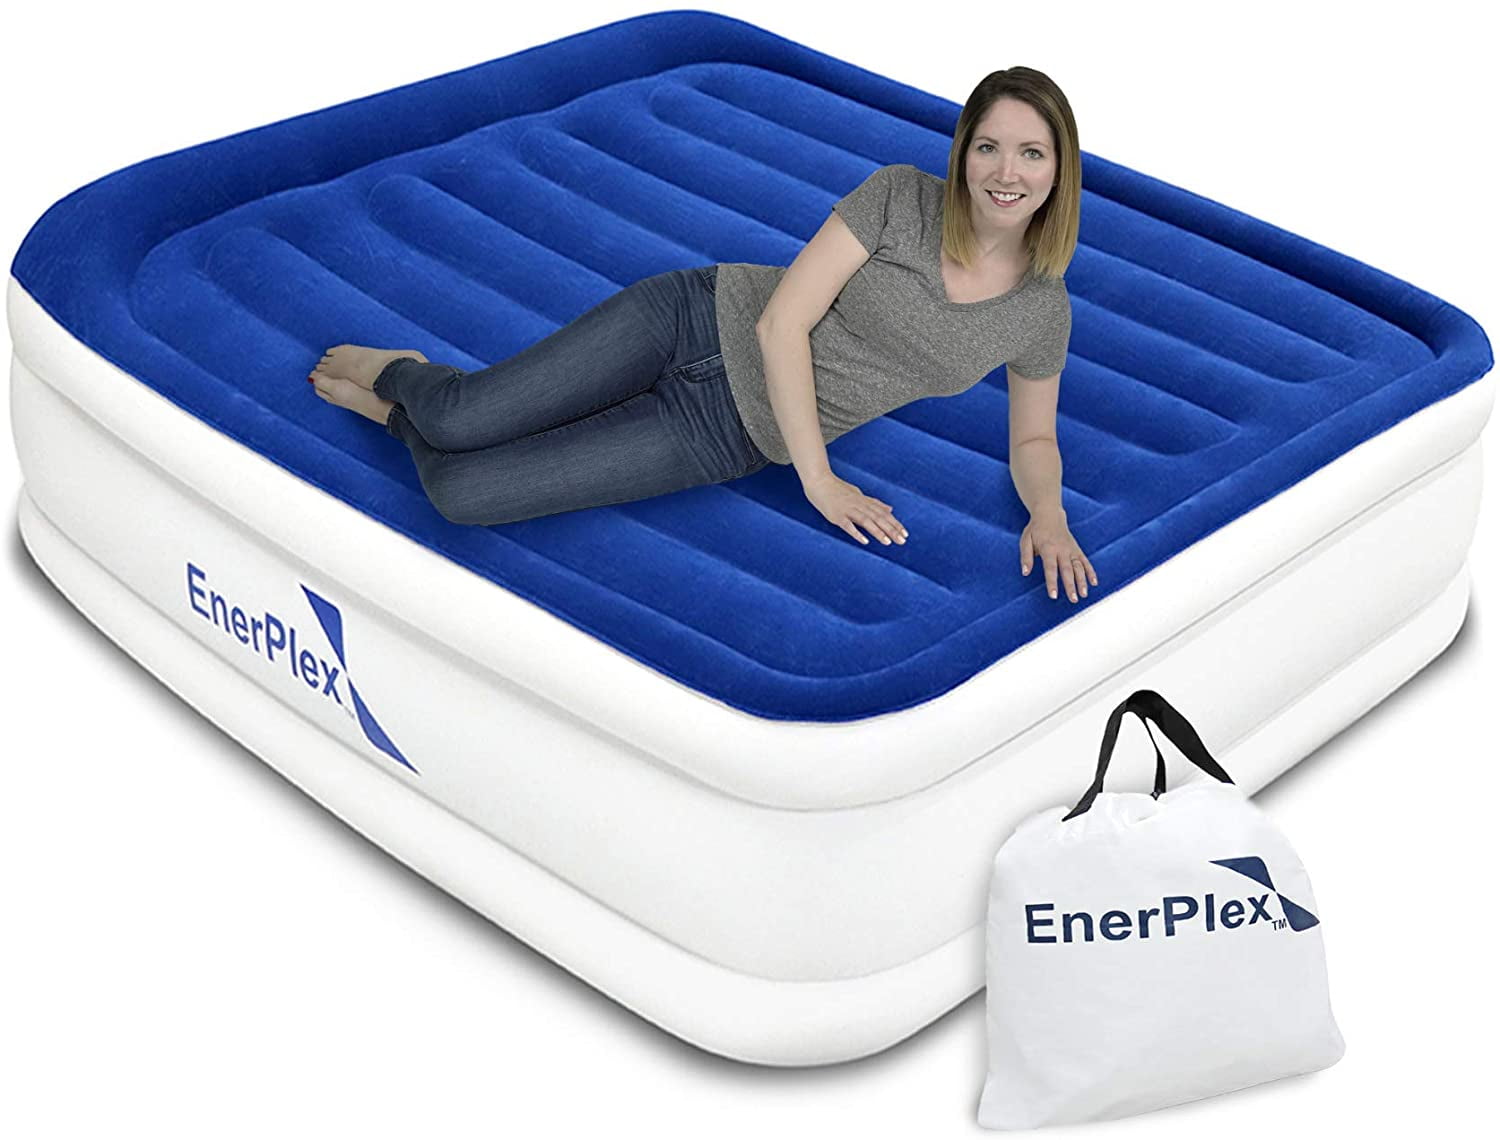 double air mattress for backpacking